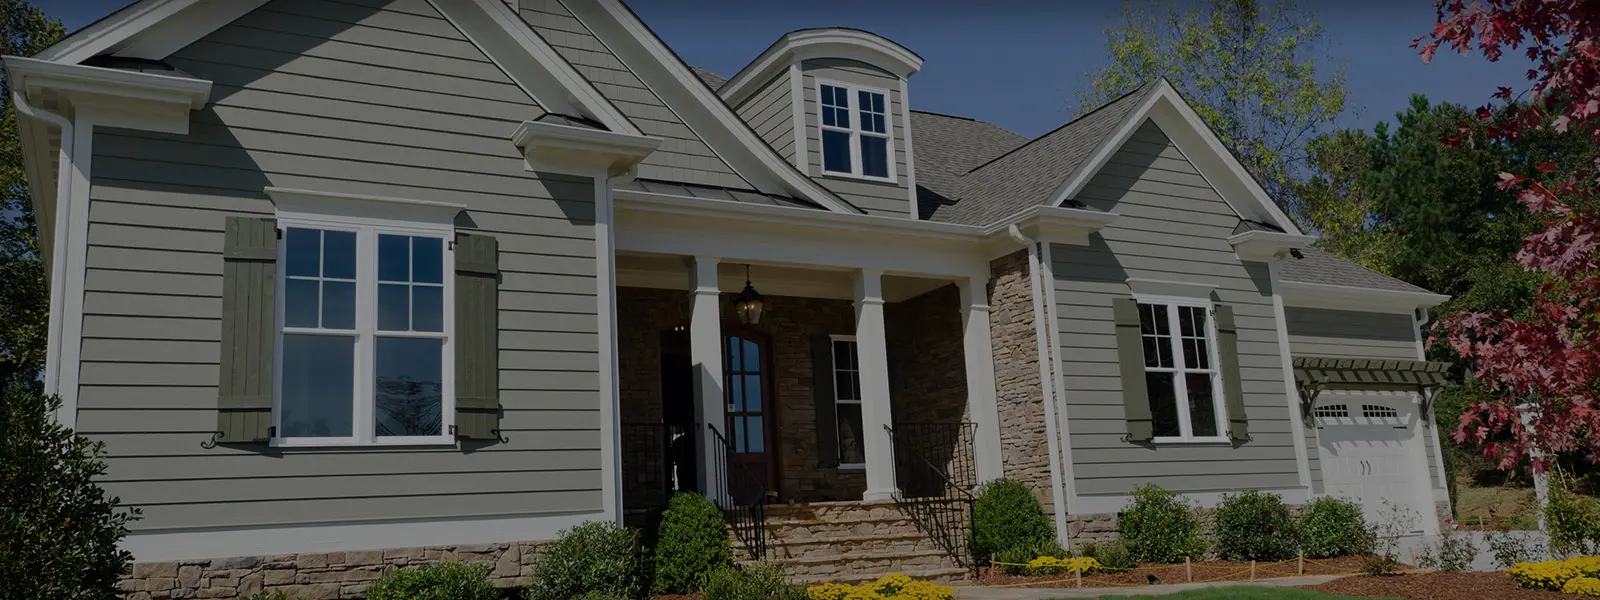 james hardie new siding contractor nashville franklin brentwood tn